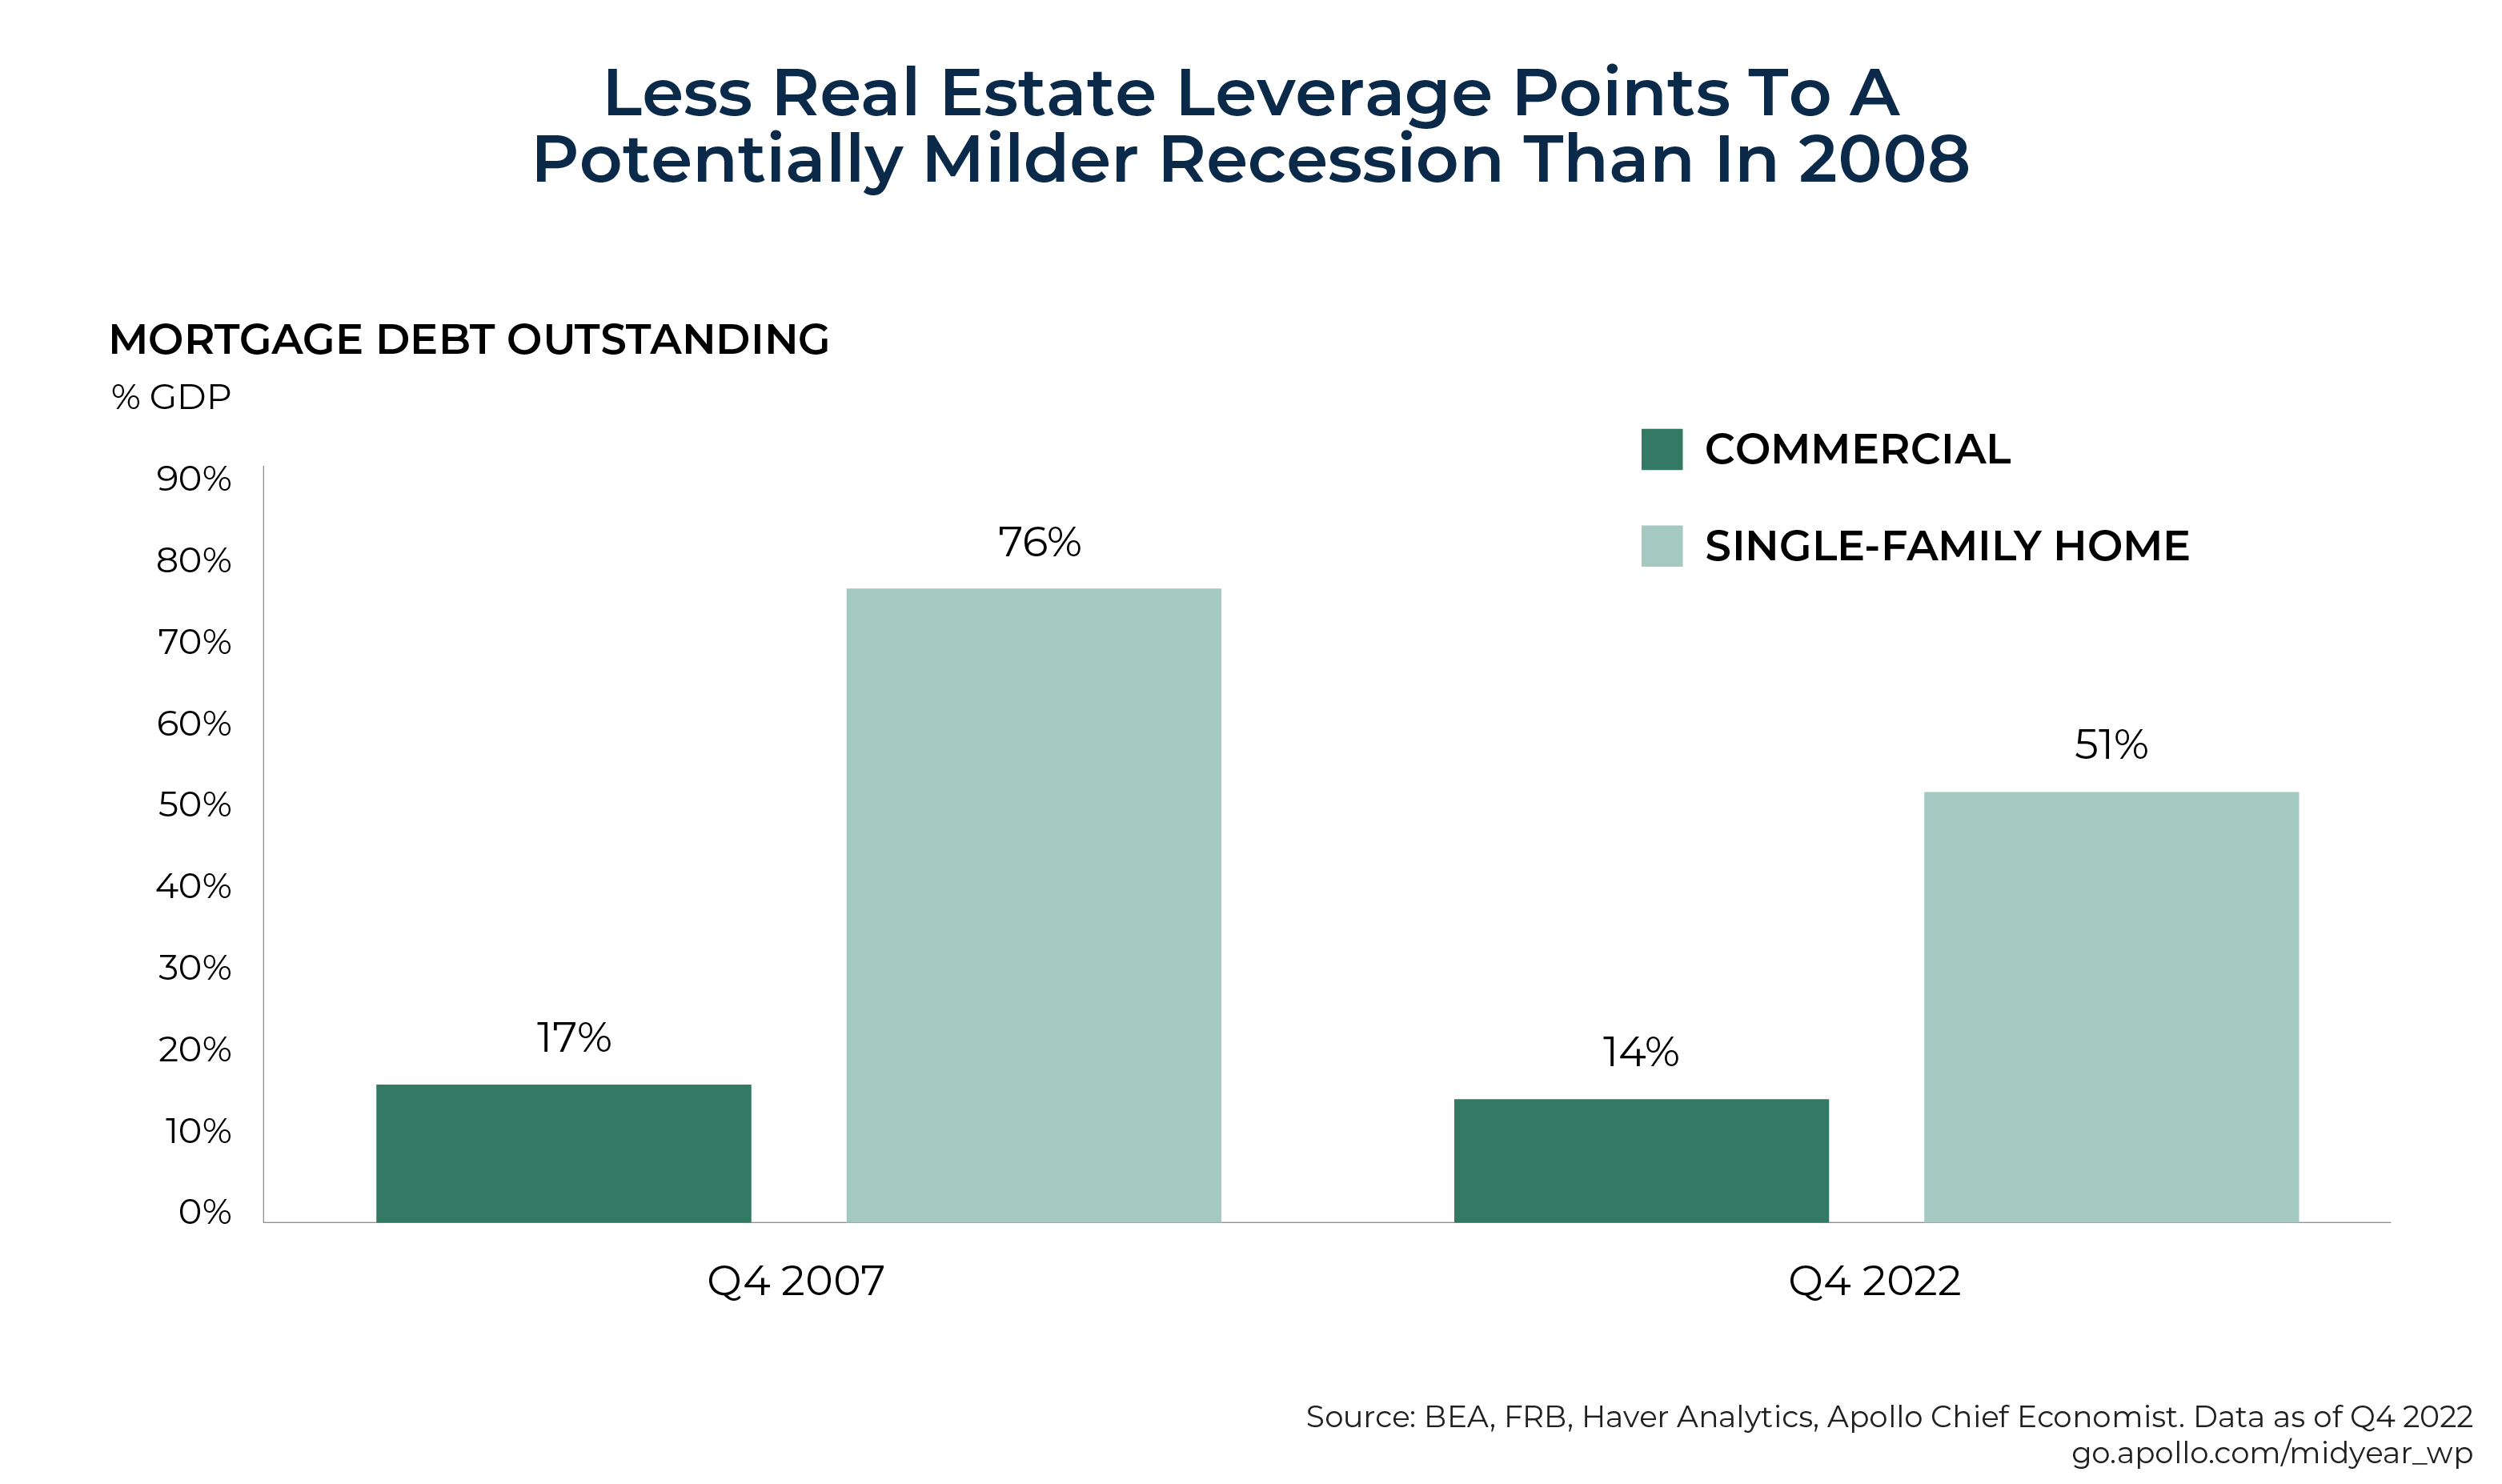 Less Real Estate Leverage Points To A Potentially Milder Recession Than In